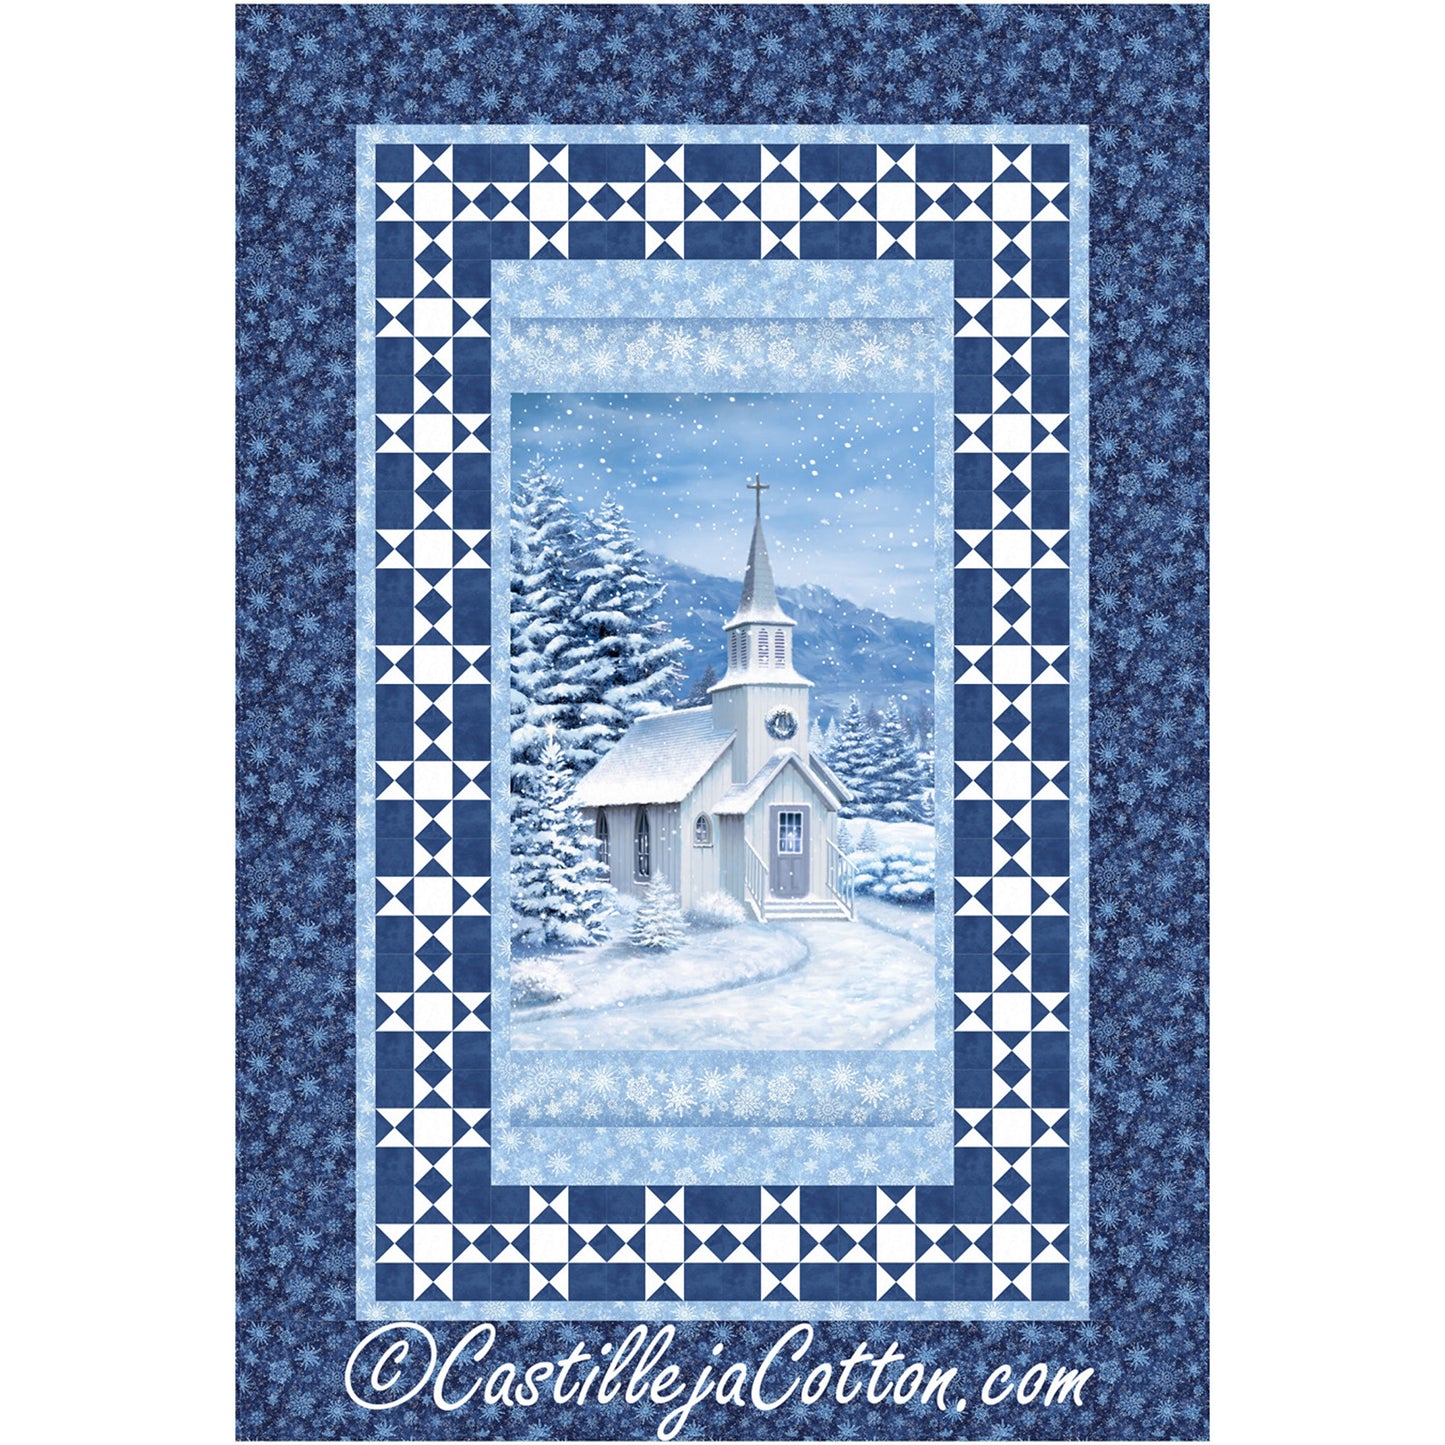 Blue and white quilt with snowy church scene with a fun snowflake border.